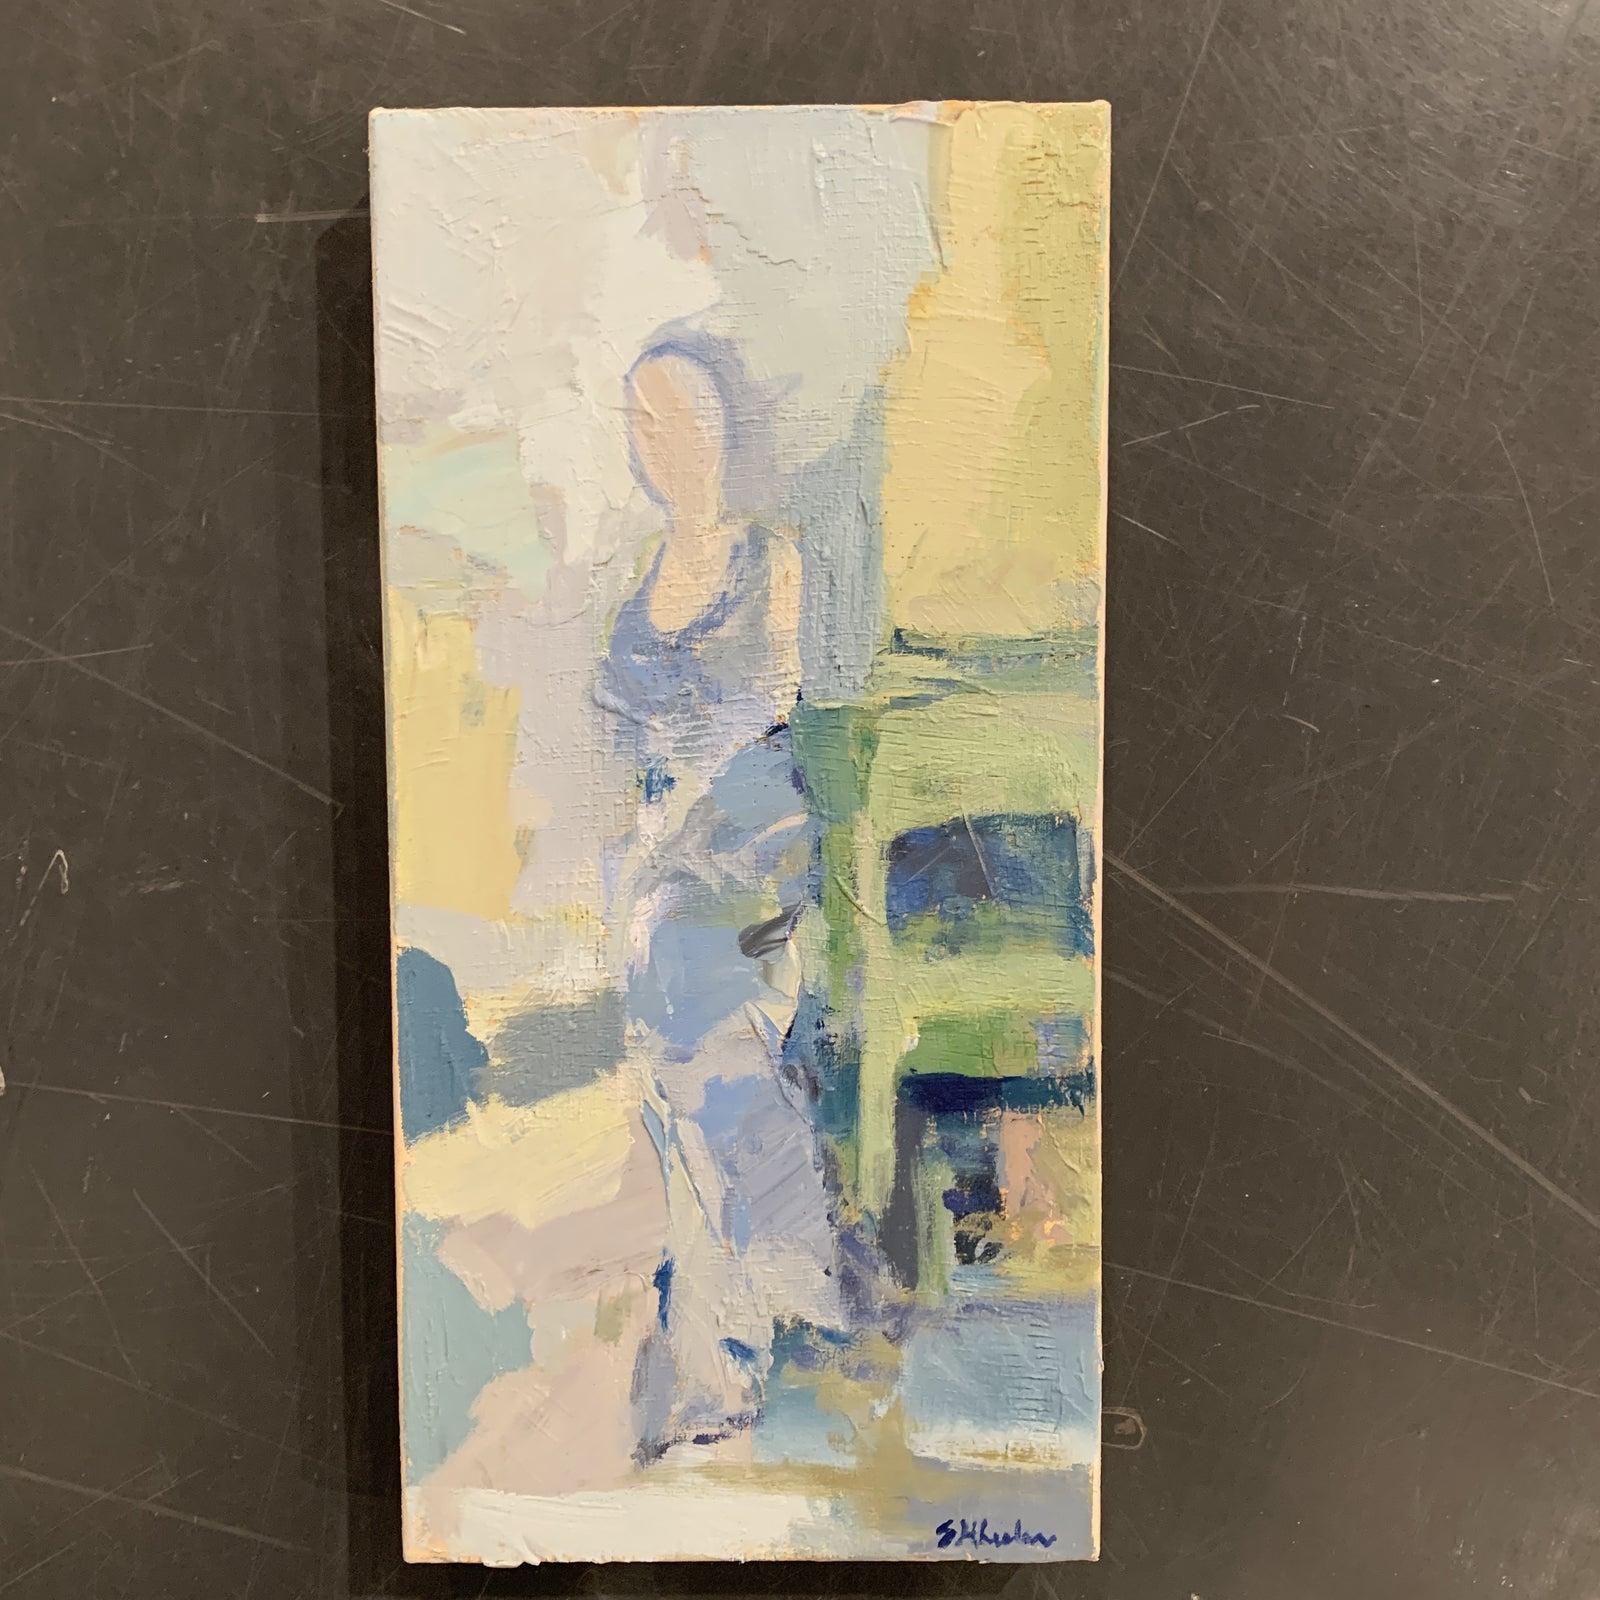 Figure in Blue Dress
Unframed Oil Painting
Wired for hanging

Signed by the arists, Stephanie Wheeler

Bio:
Somewhere between impressionism and abstraction, Stephanie Wheeler’s paintings take on a life of their own. She began her career in Atlanta